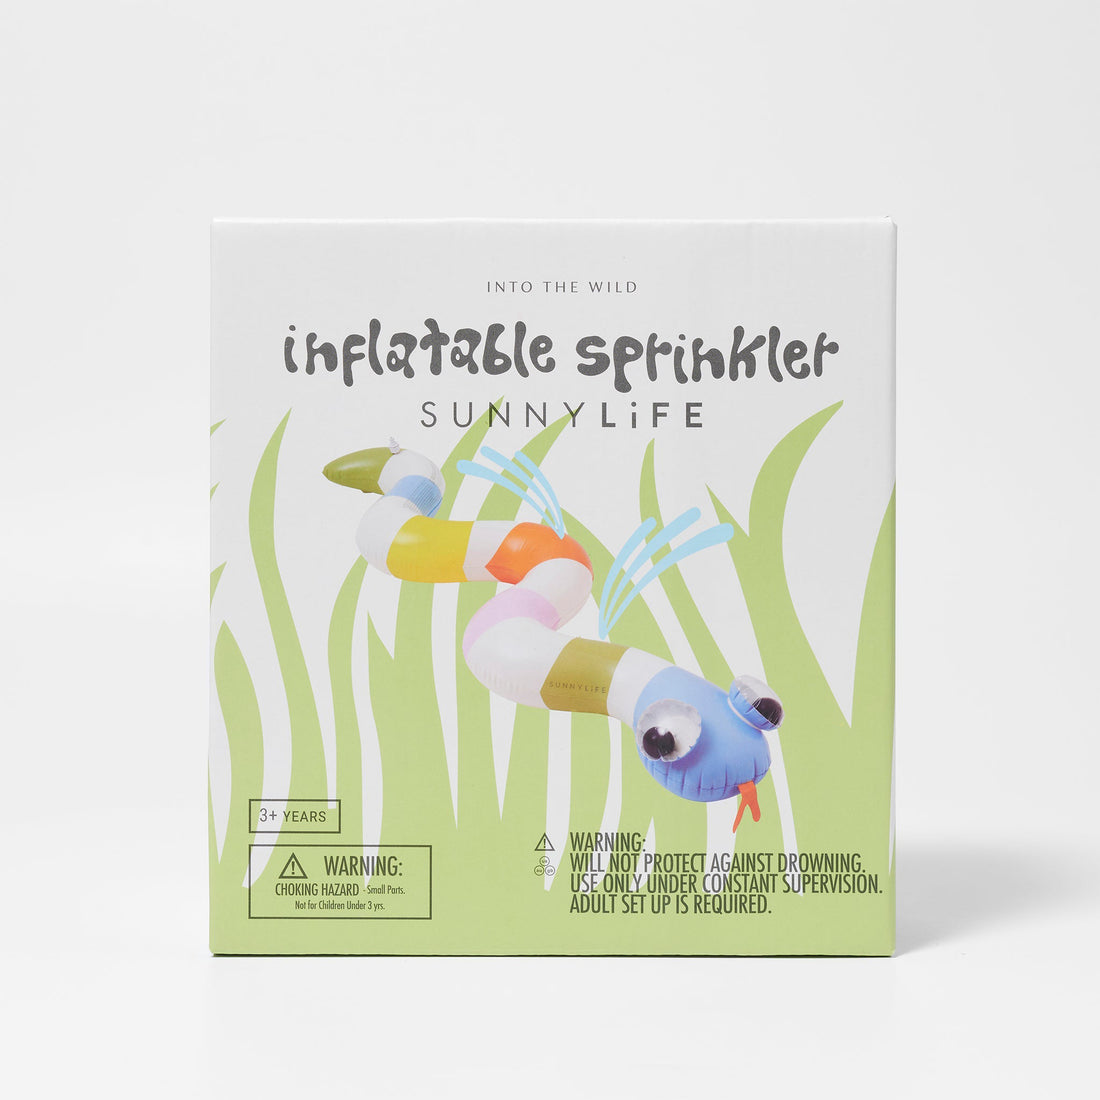 sunnylife-inflatable-sprinkler-into-the-wild-multi-sunl-s41issnk